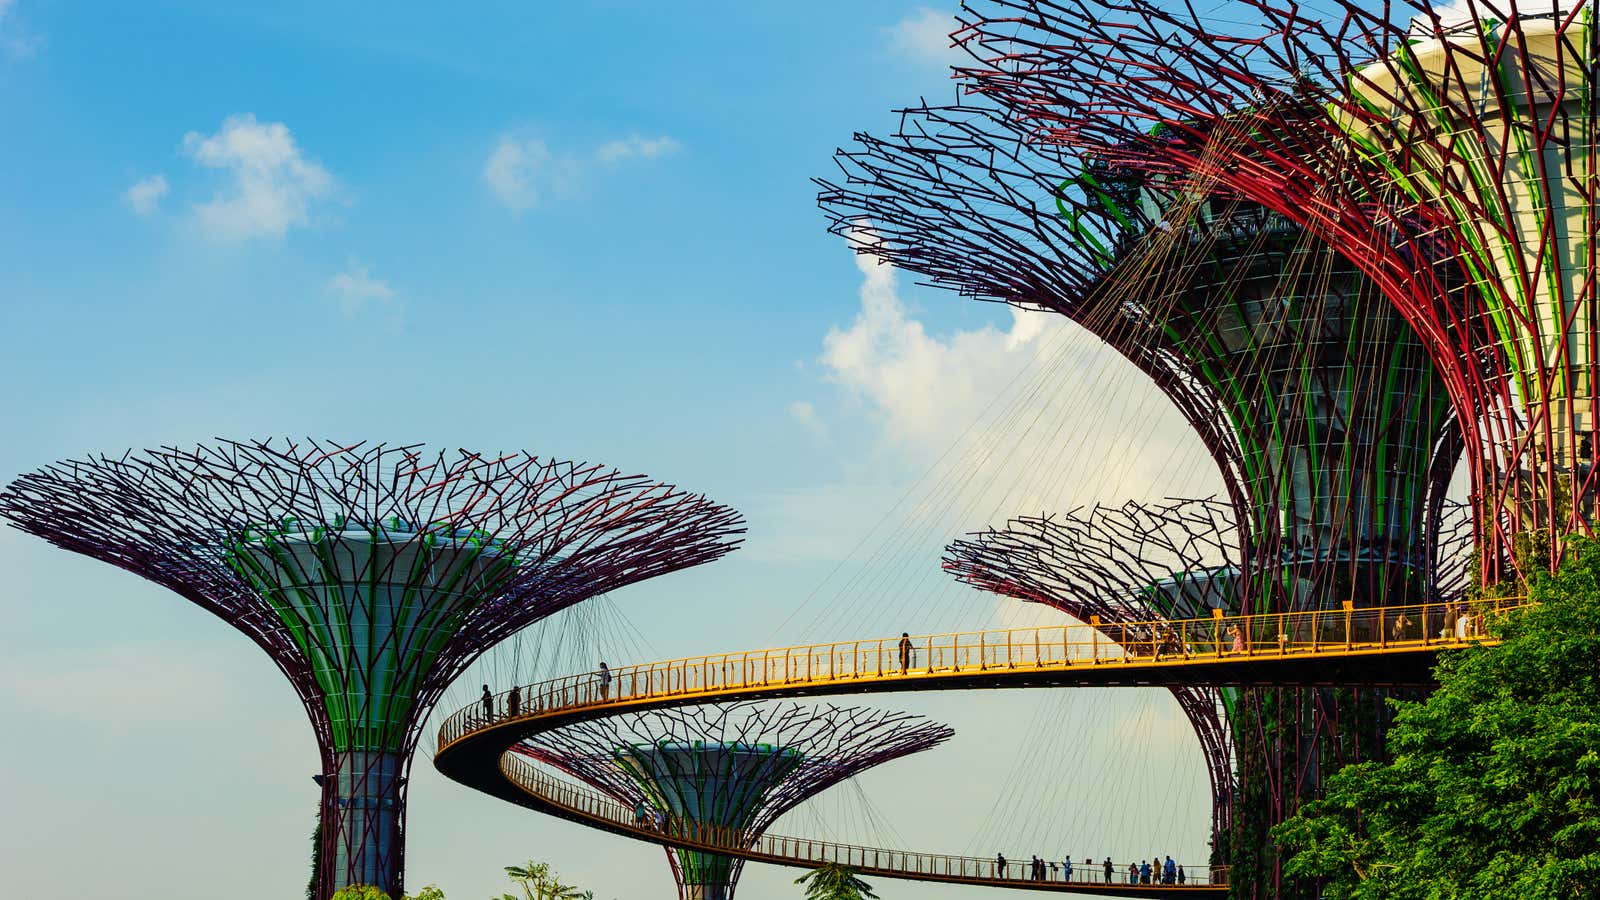 Visitors enjoy a stroll through Singapore’s Gardens by the Bay. (Singapore Tourism Board)